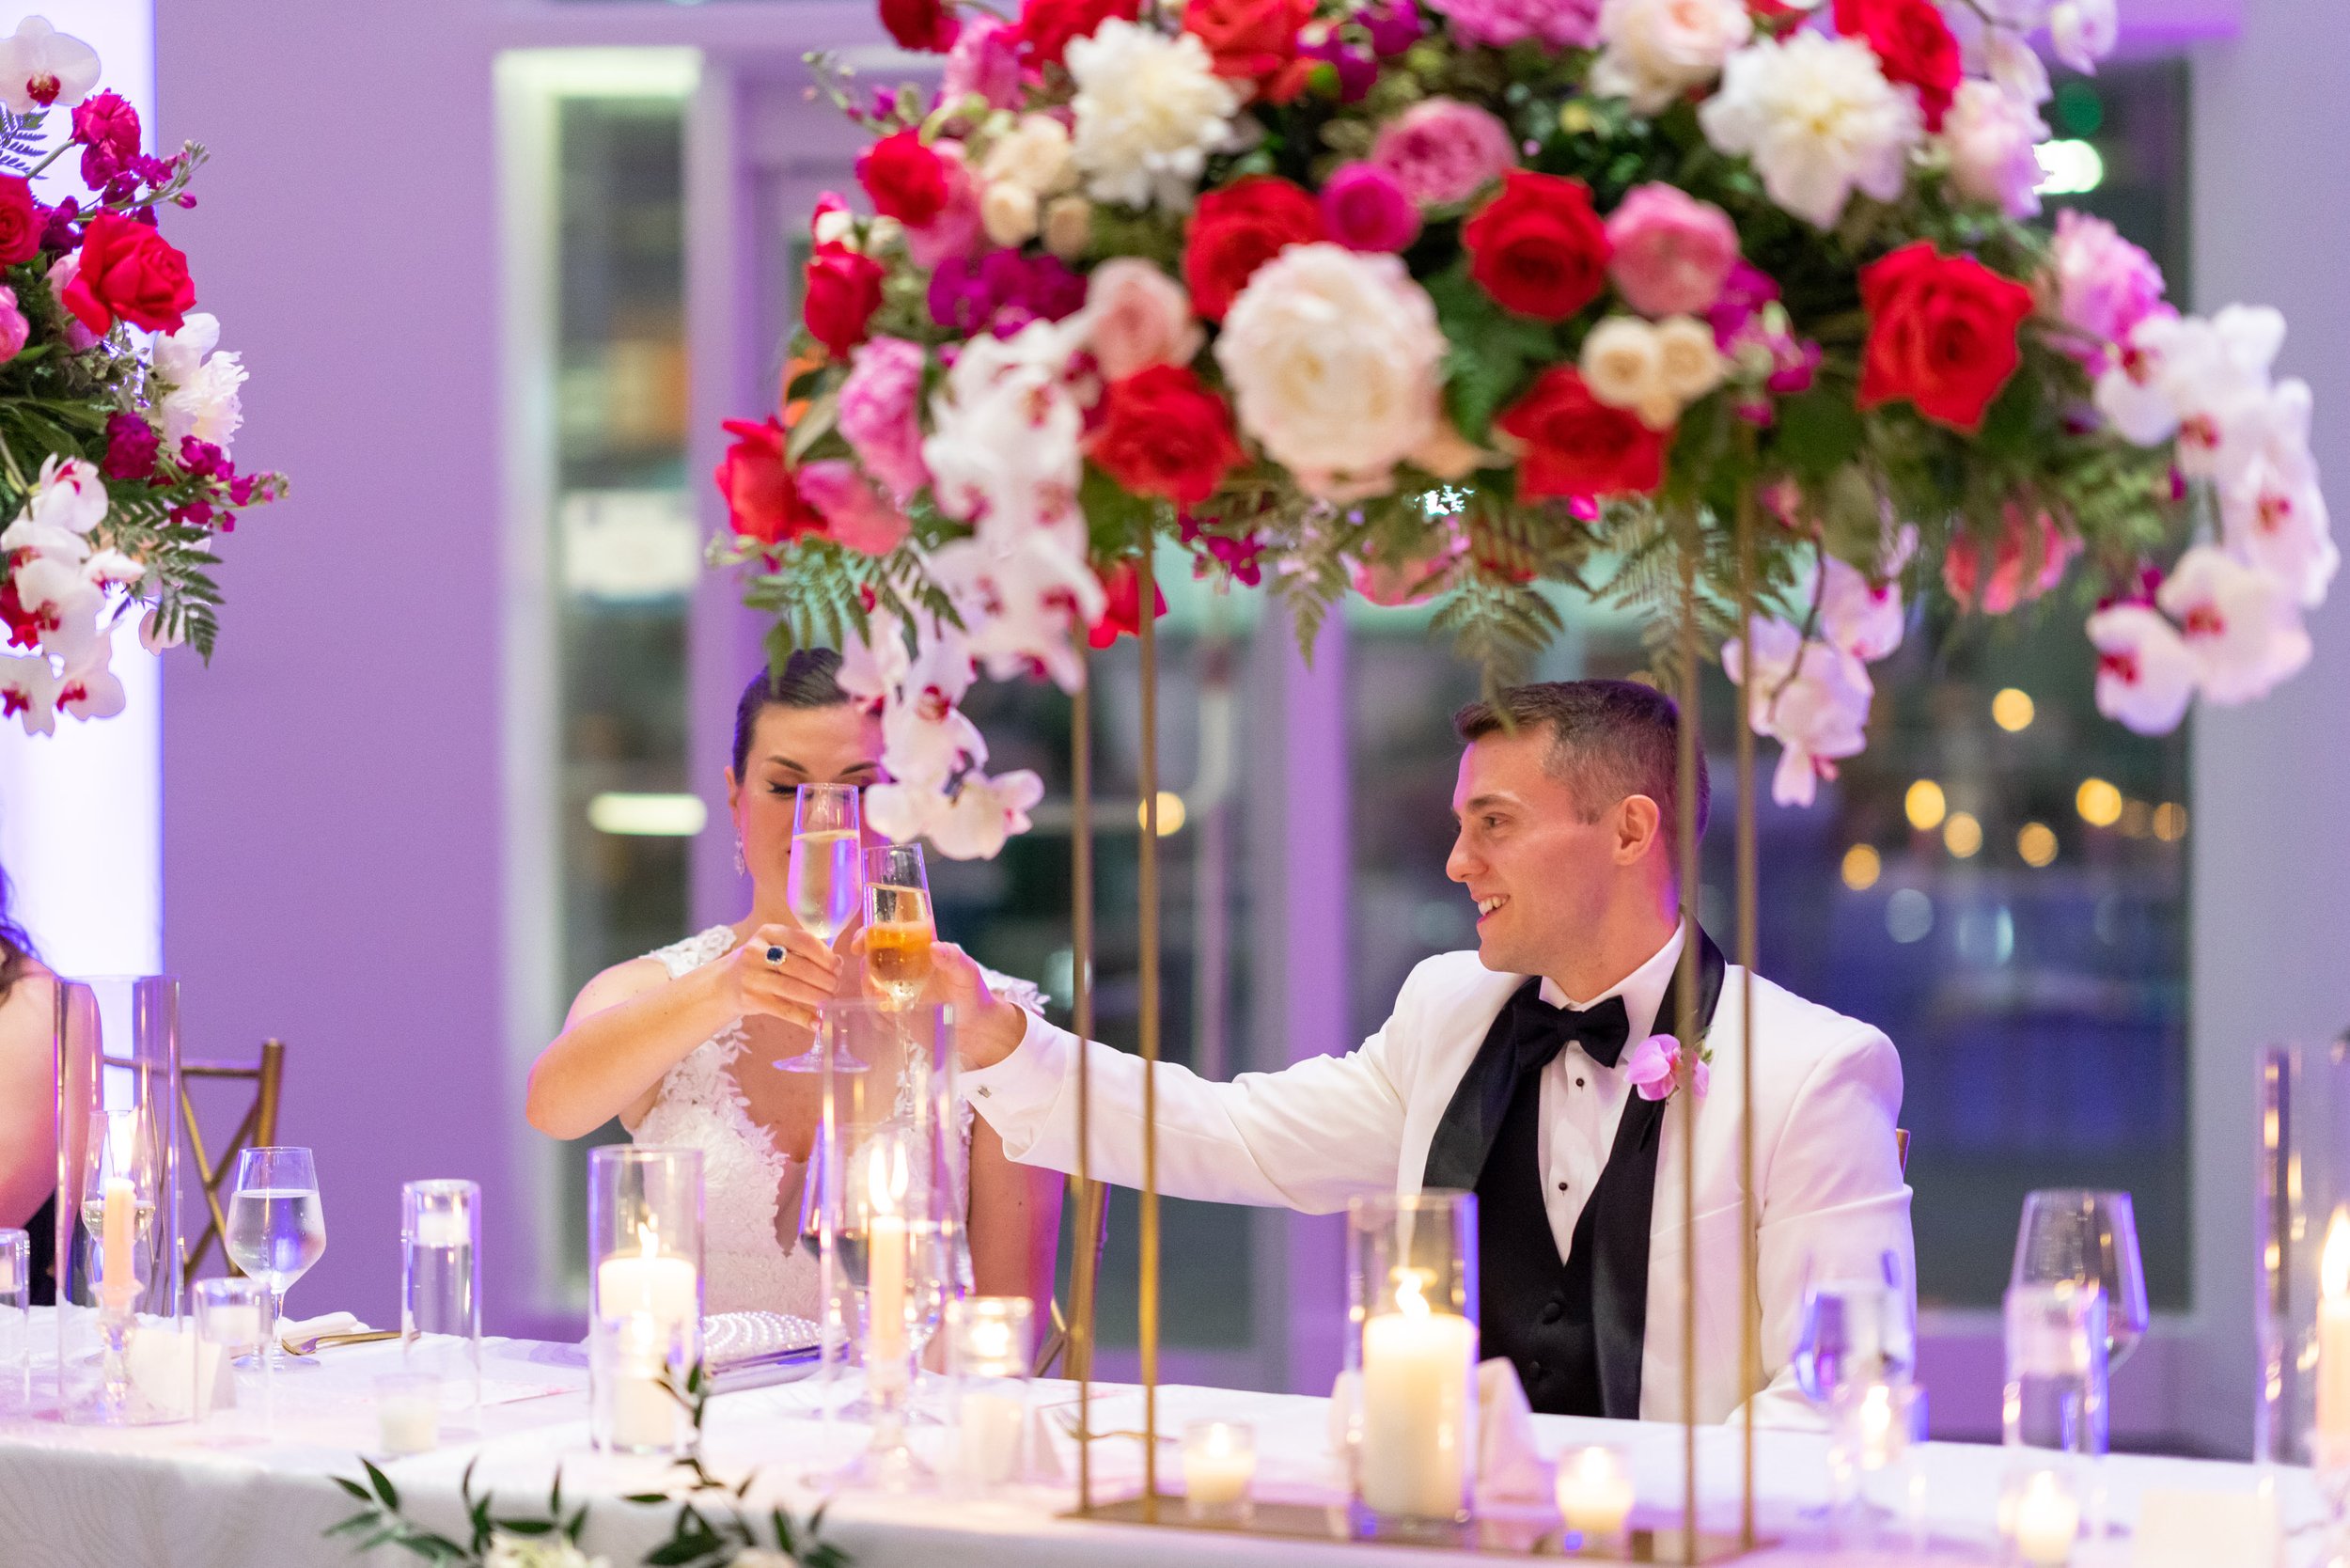 Bride and groom toast champagne during speeches